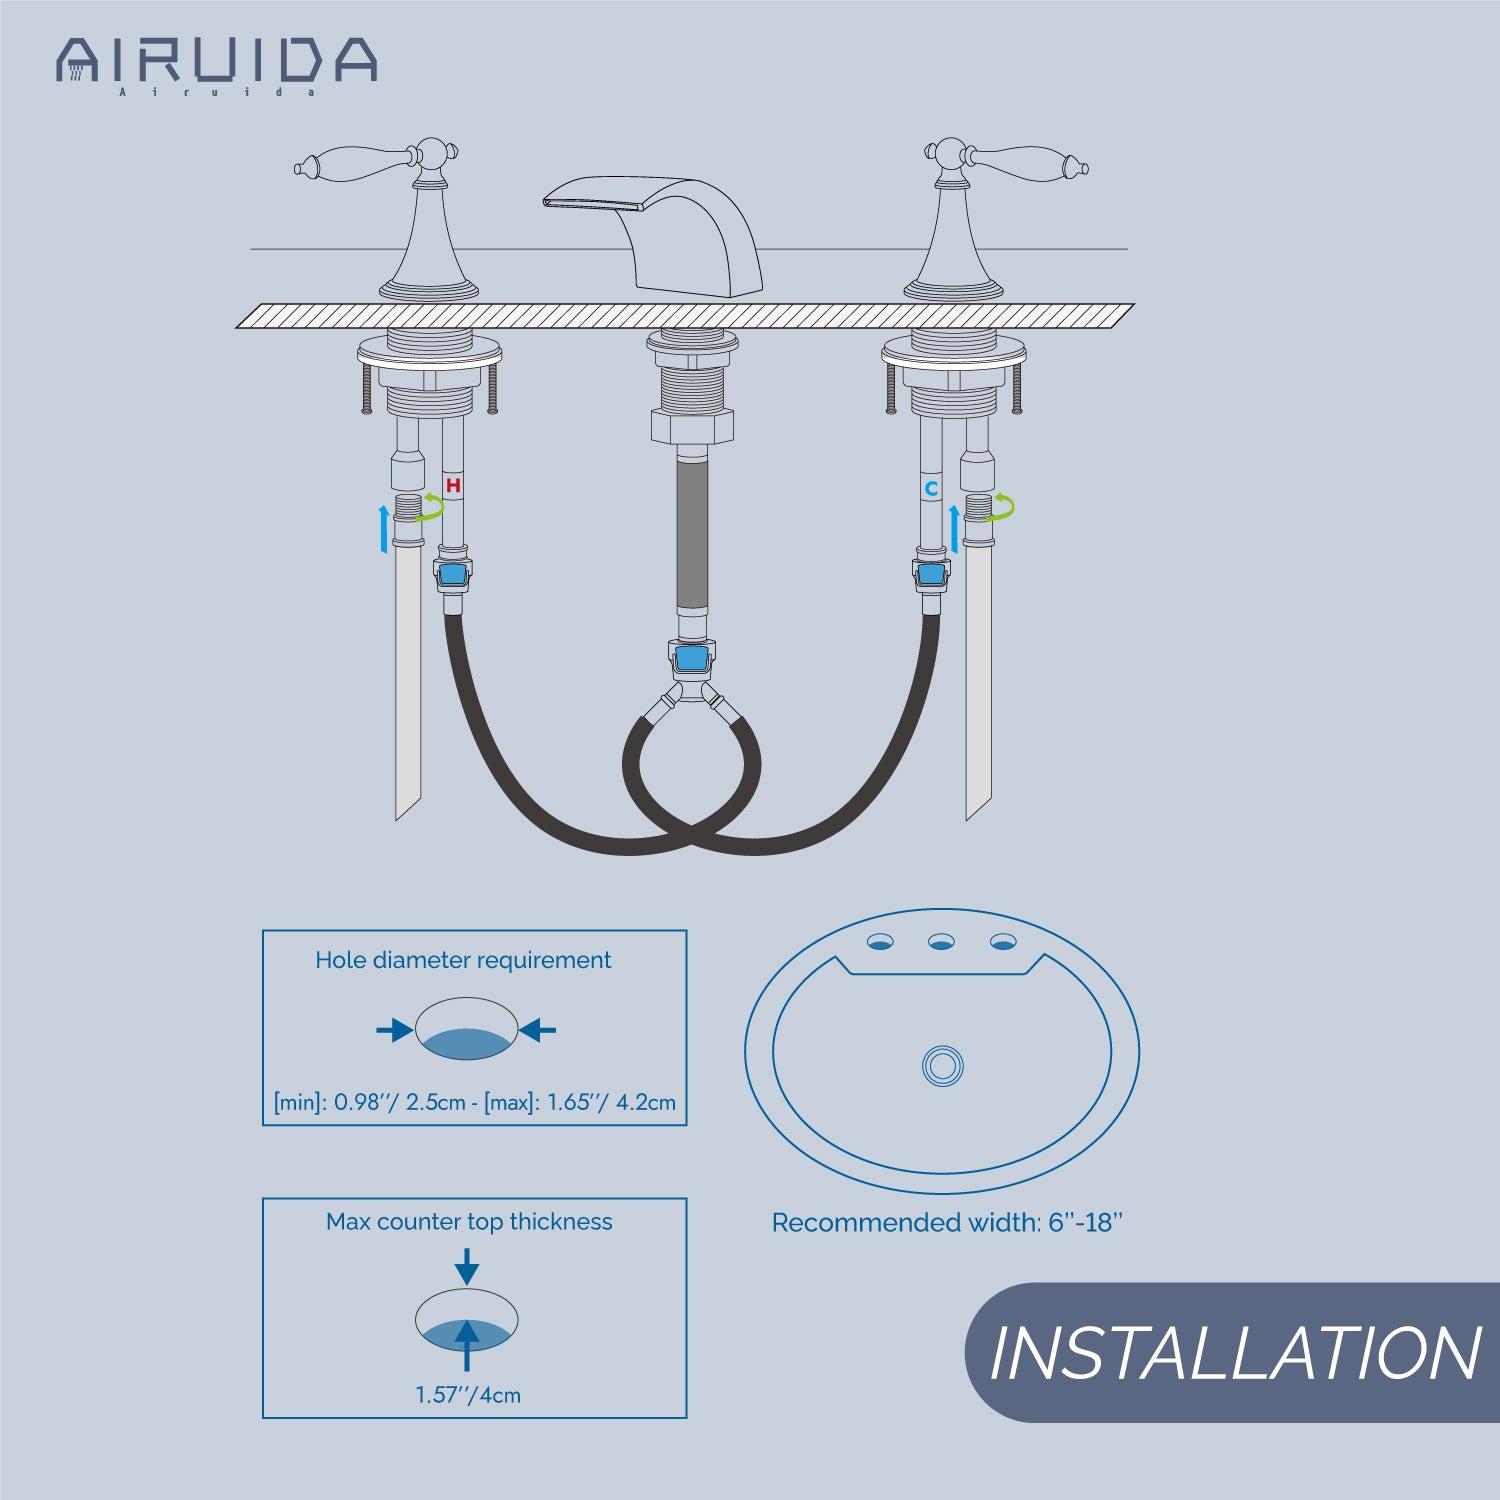 Airuida Widespread Waterfall Bathroom Faucet, Deck Mounted 8 Inch Faucet, Double Handles 3 Holes Waterfall Bathroom Faucet